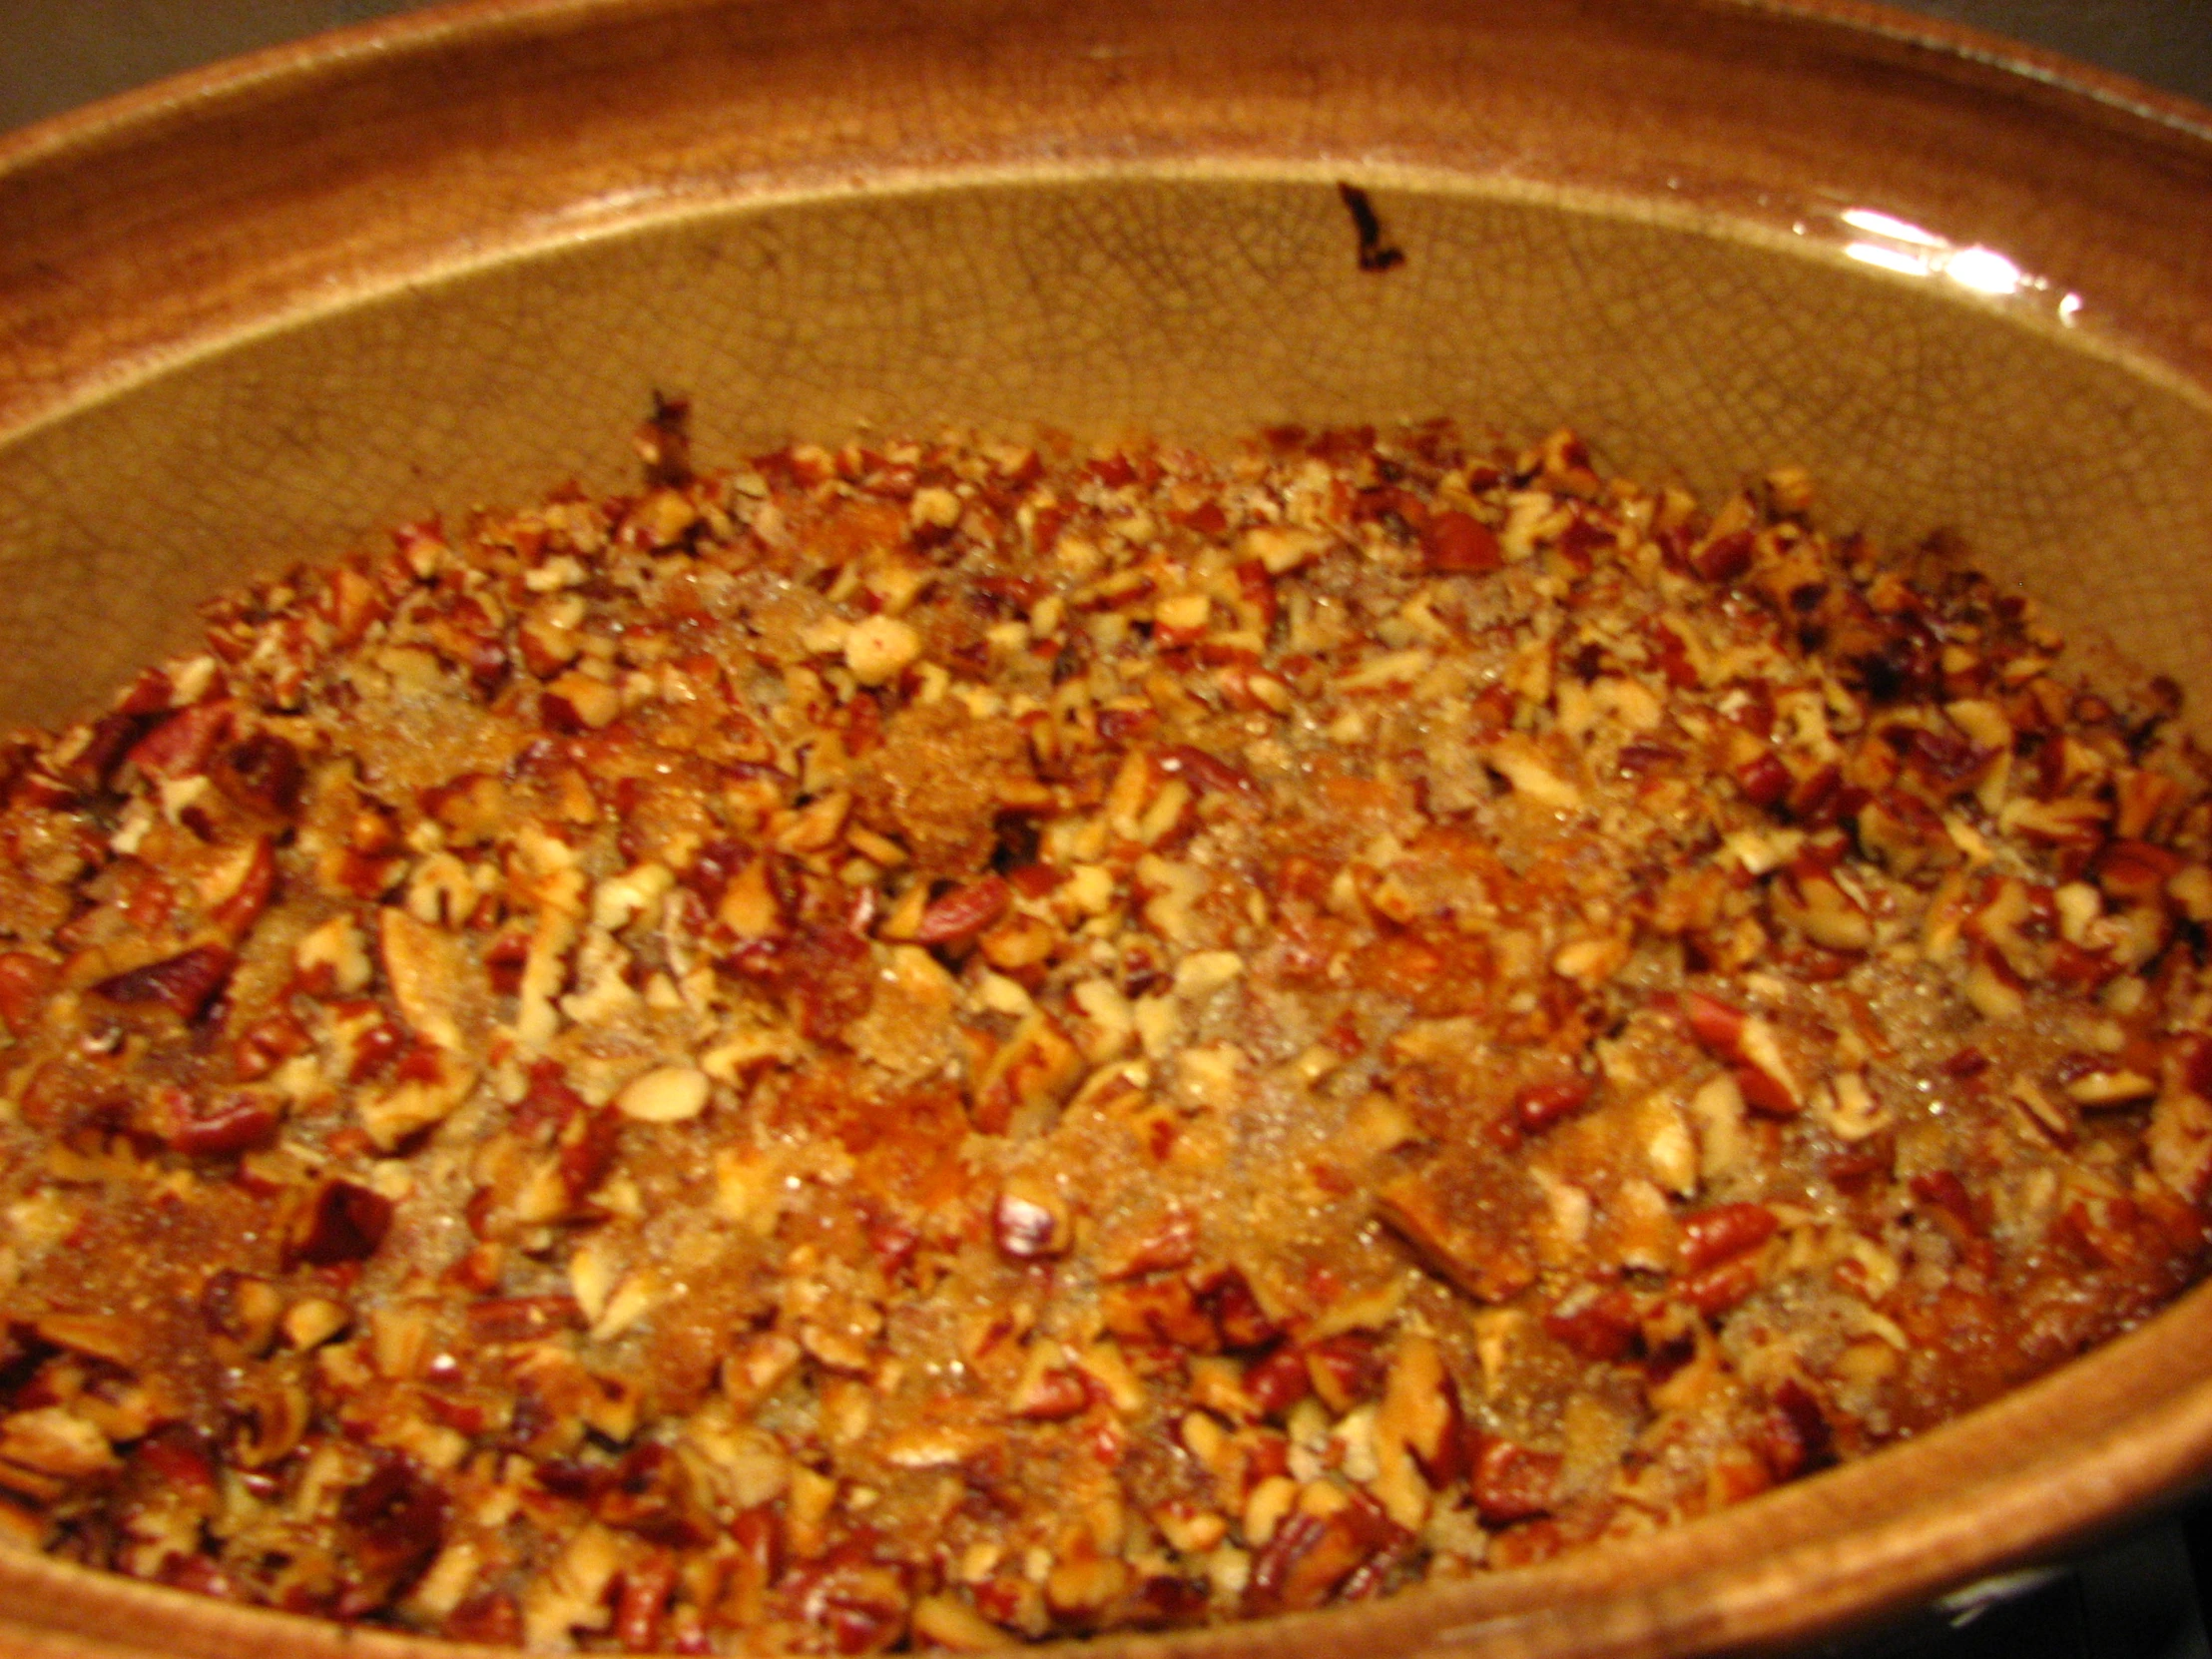 a serving dish covered in nuts and spices